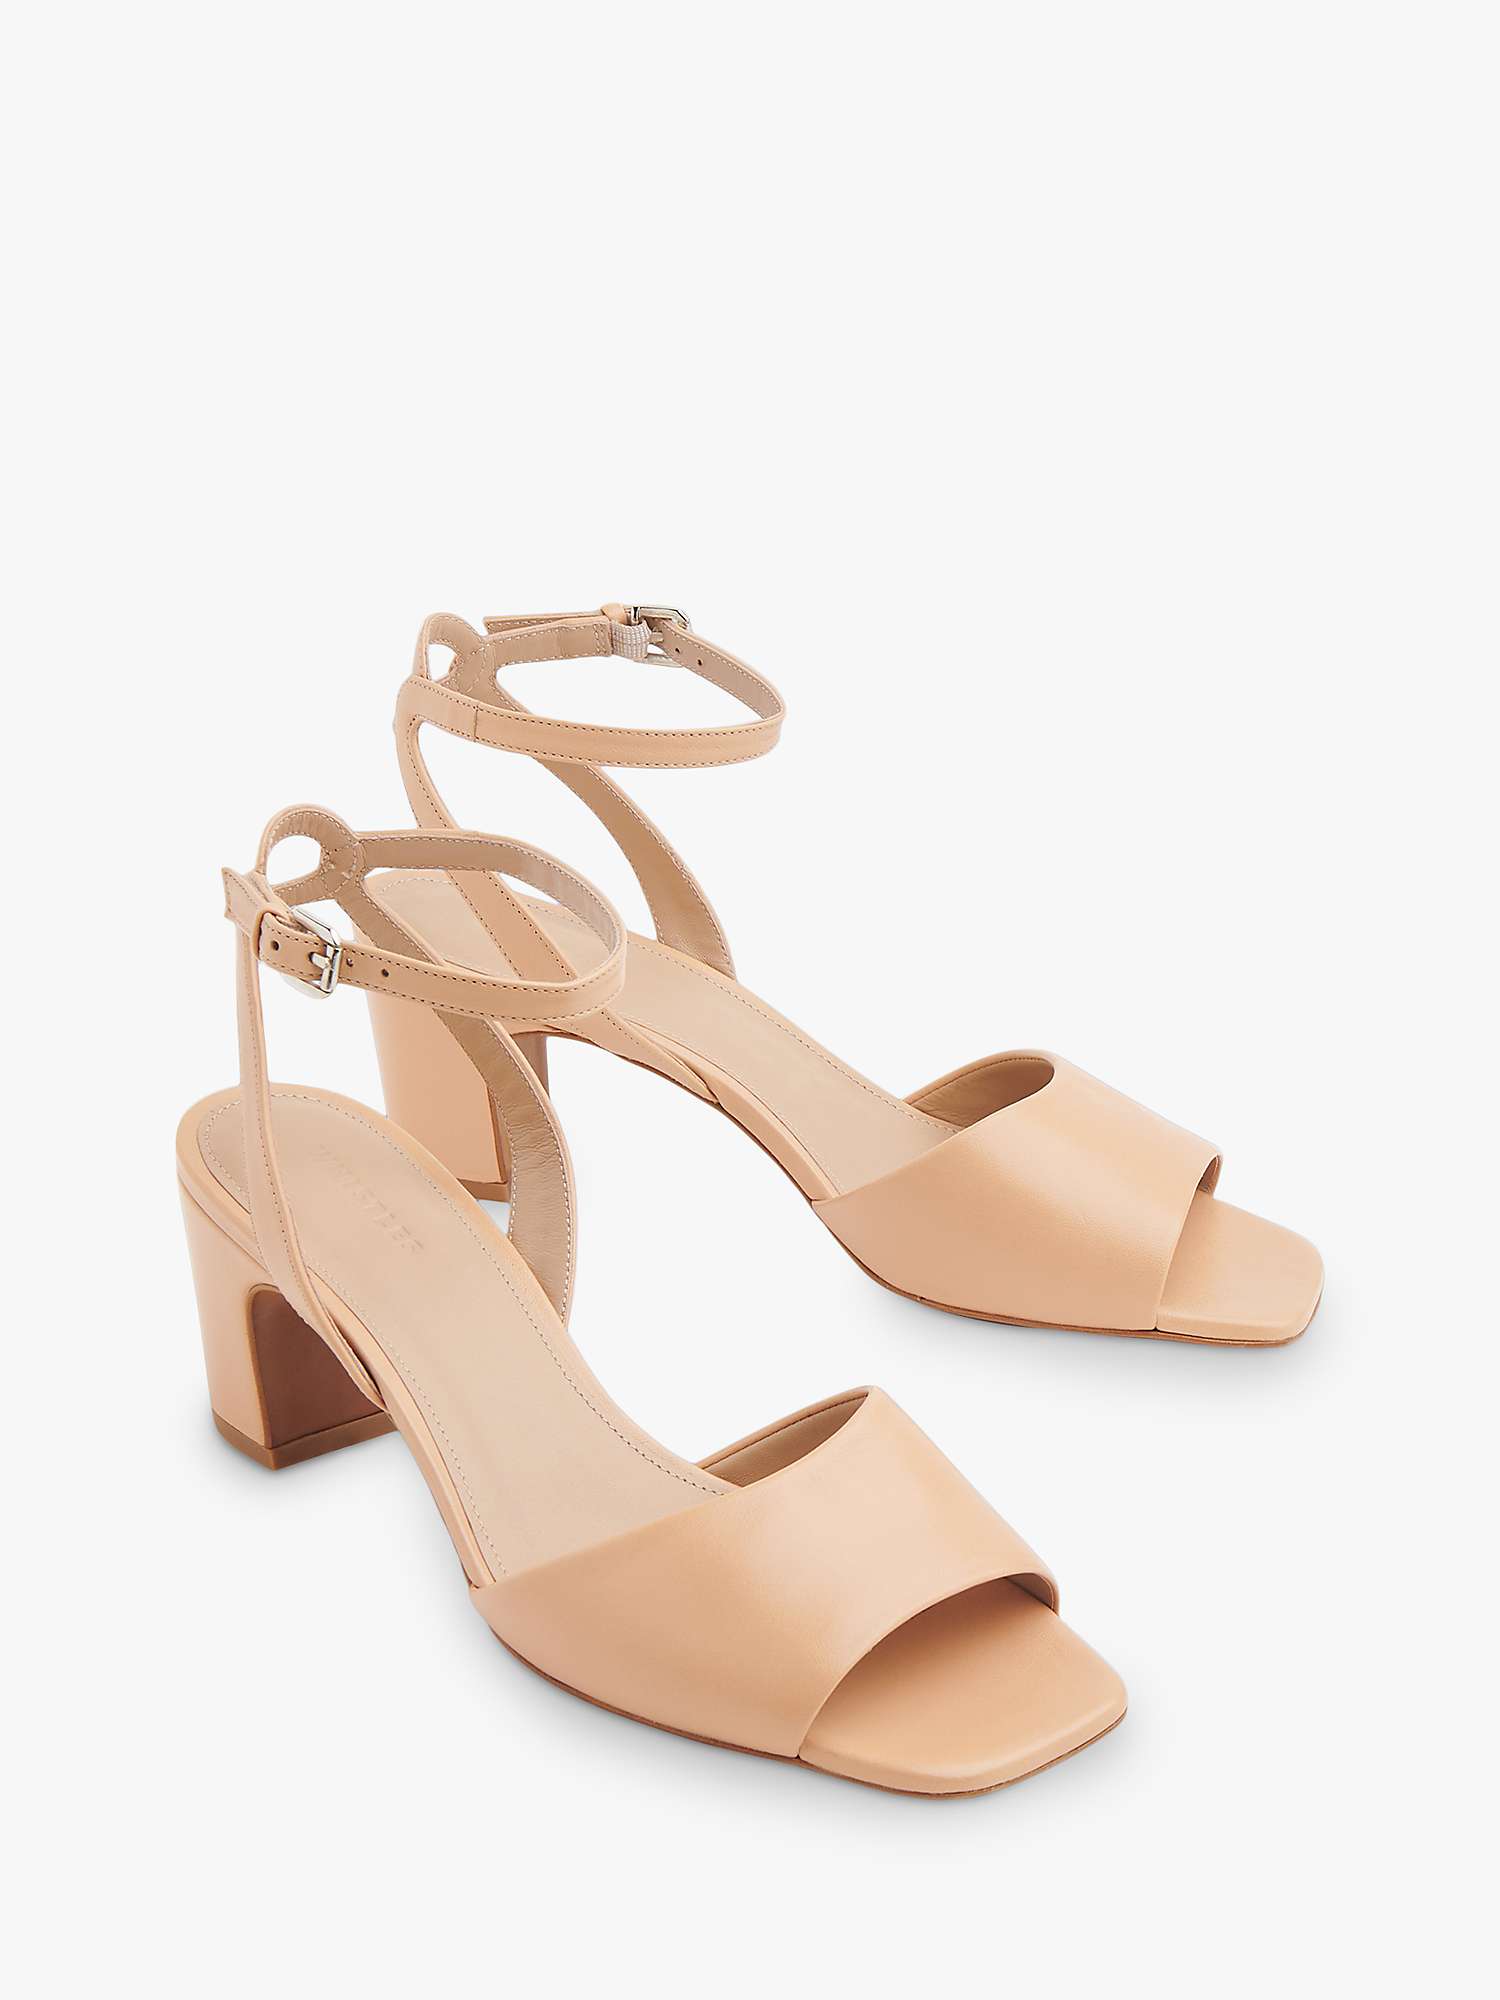 Buy Whistles Emerson Leather Mid Block Heel Sandals, Neutral Online at johnlewis.com